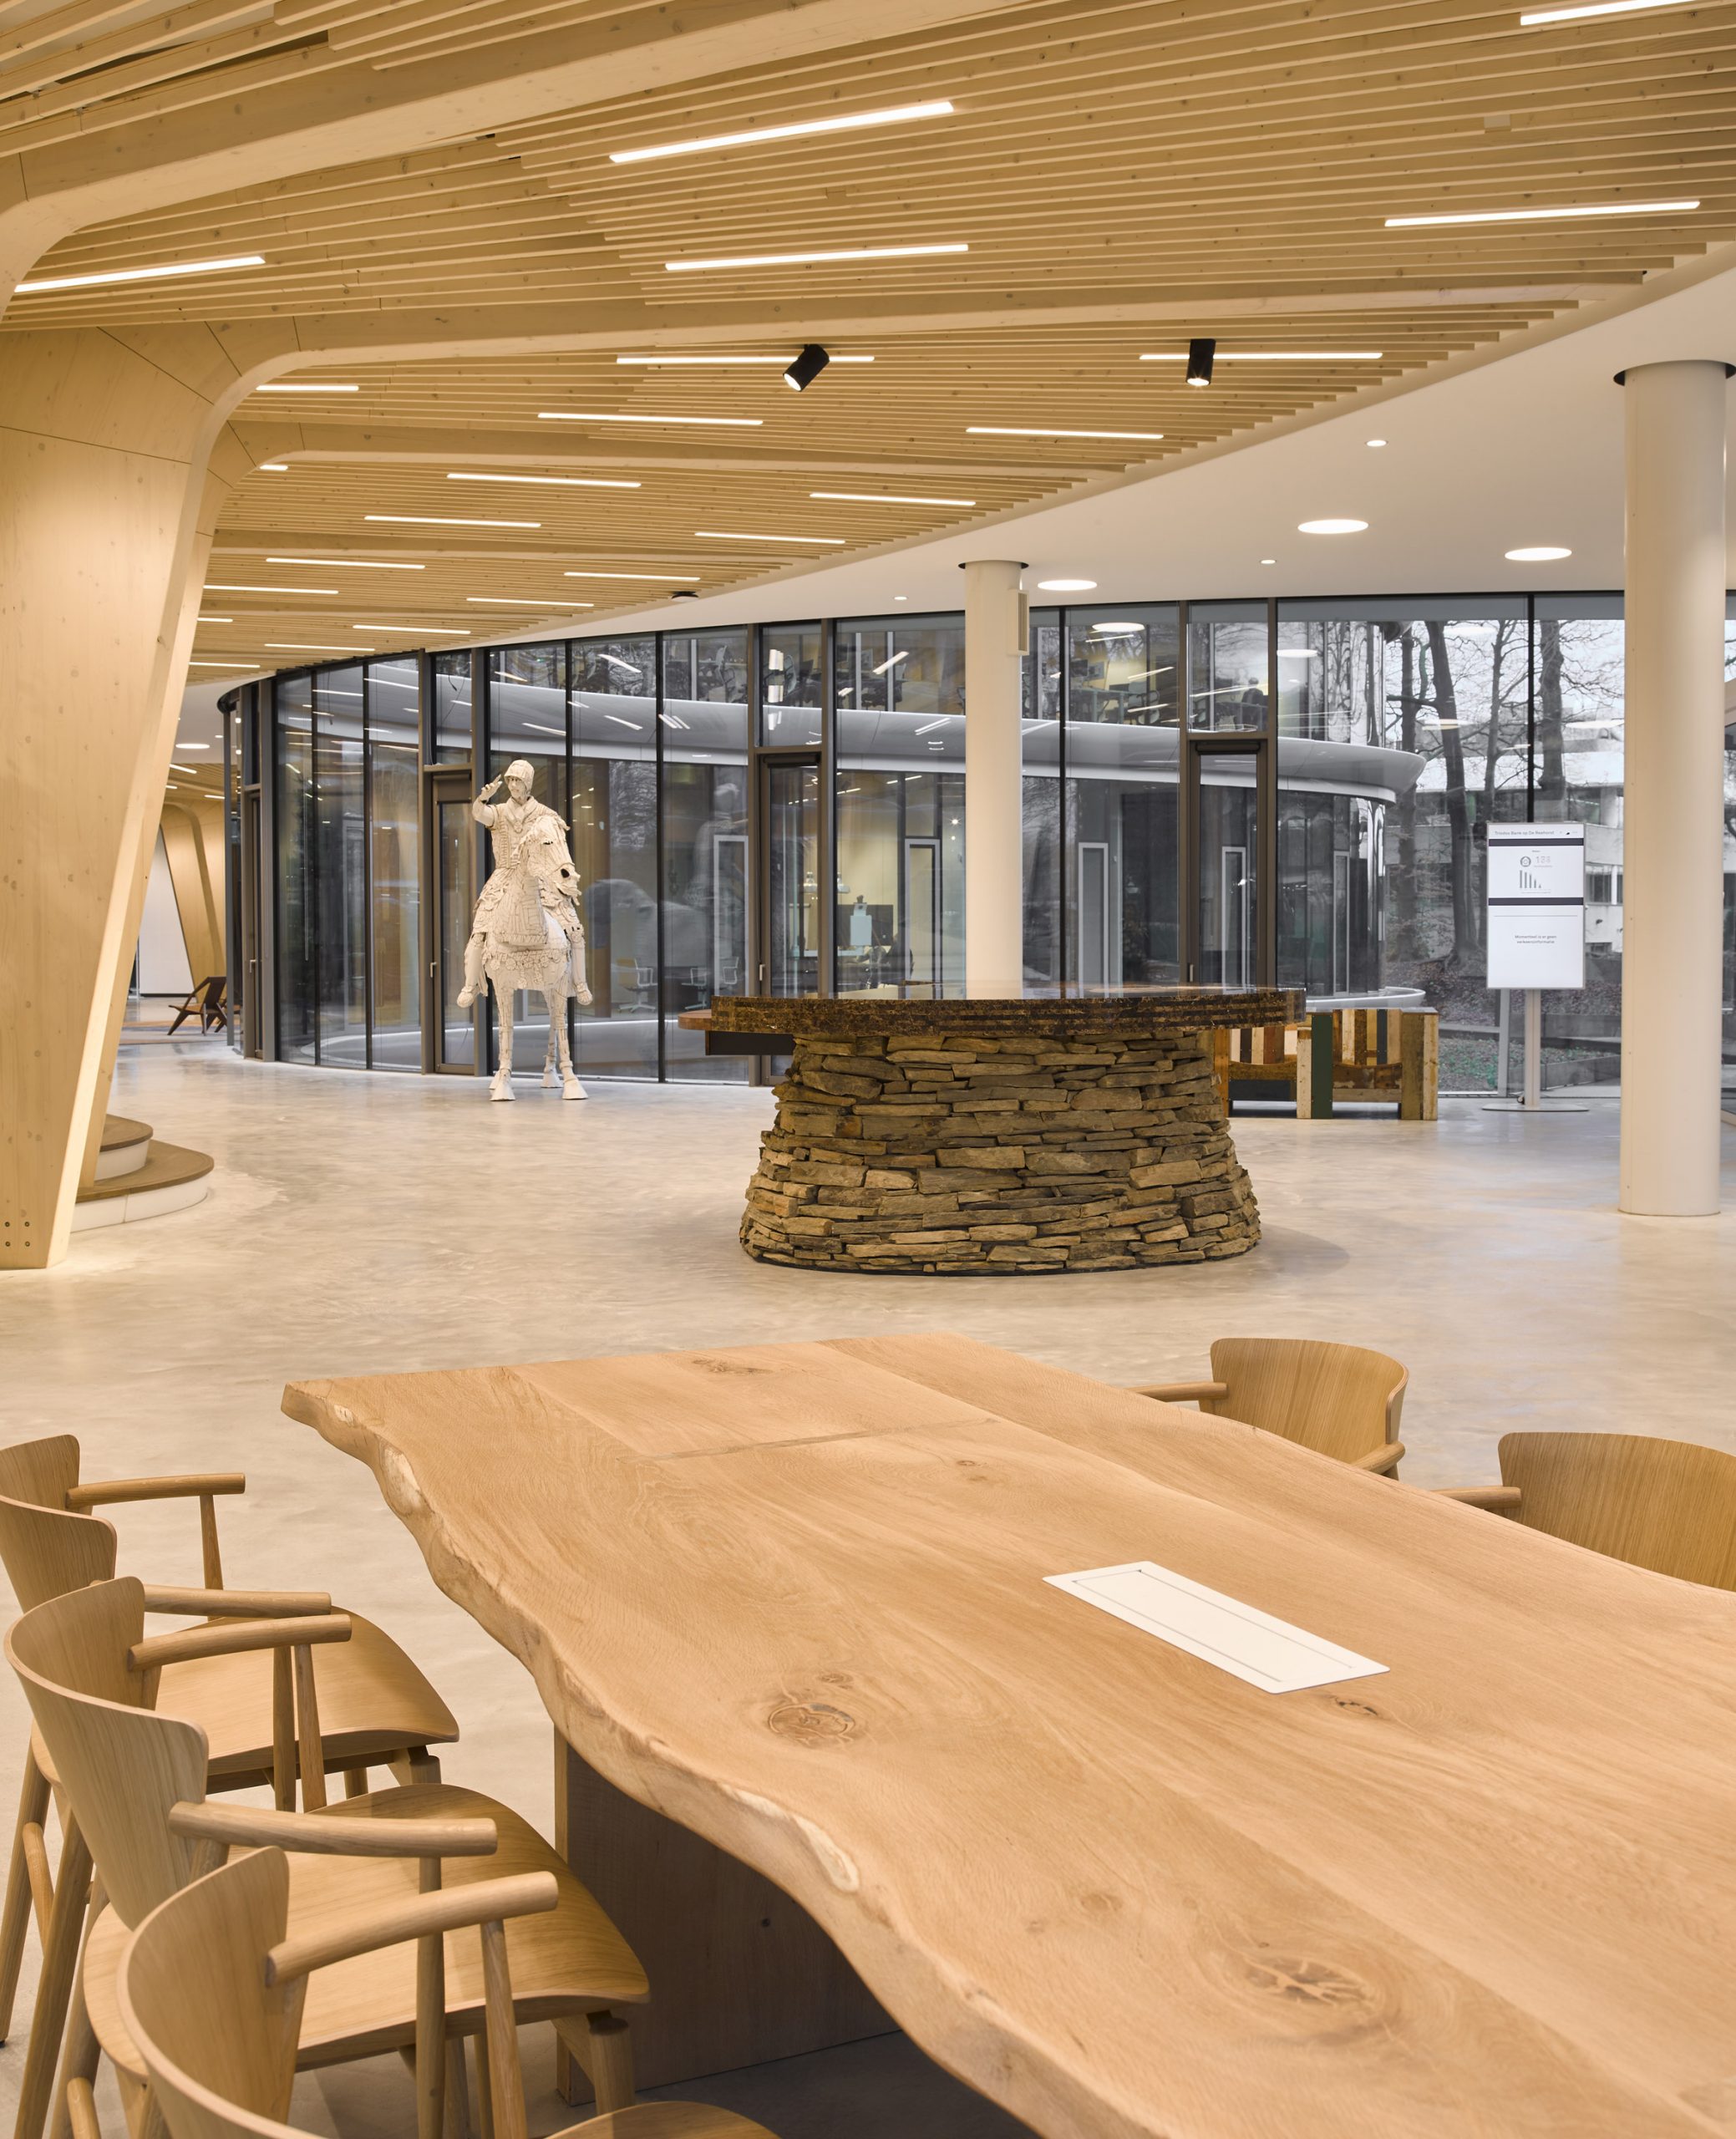 An office lobby with an exposed timber ceiling